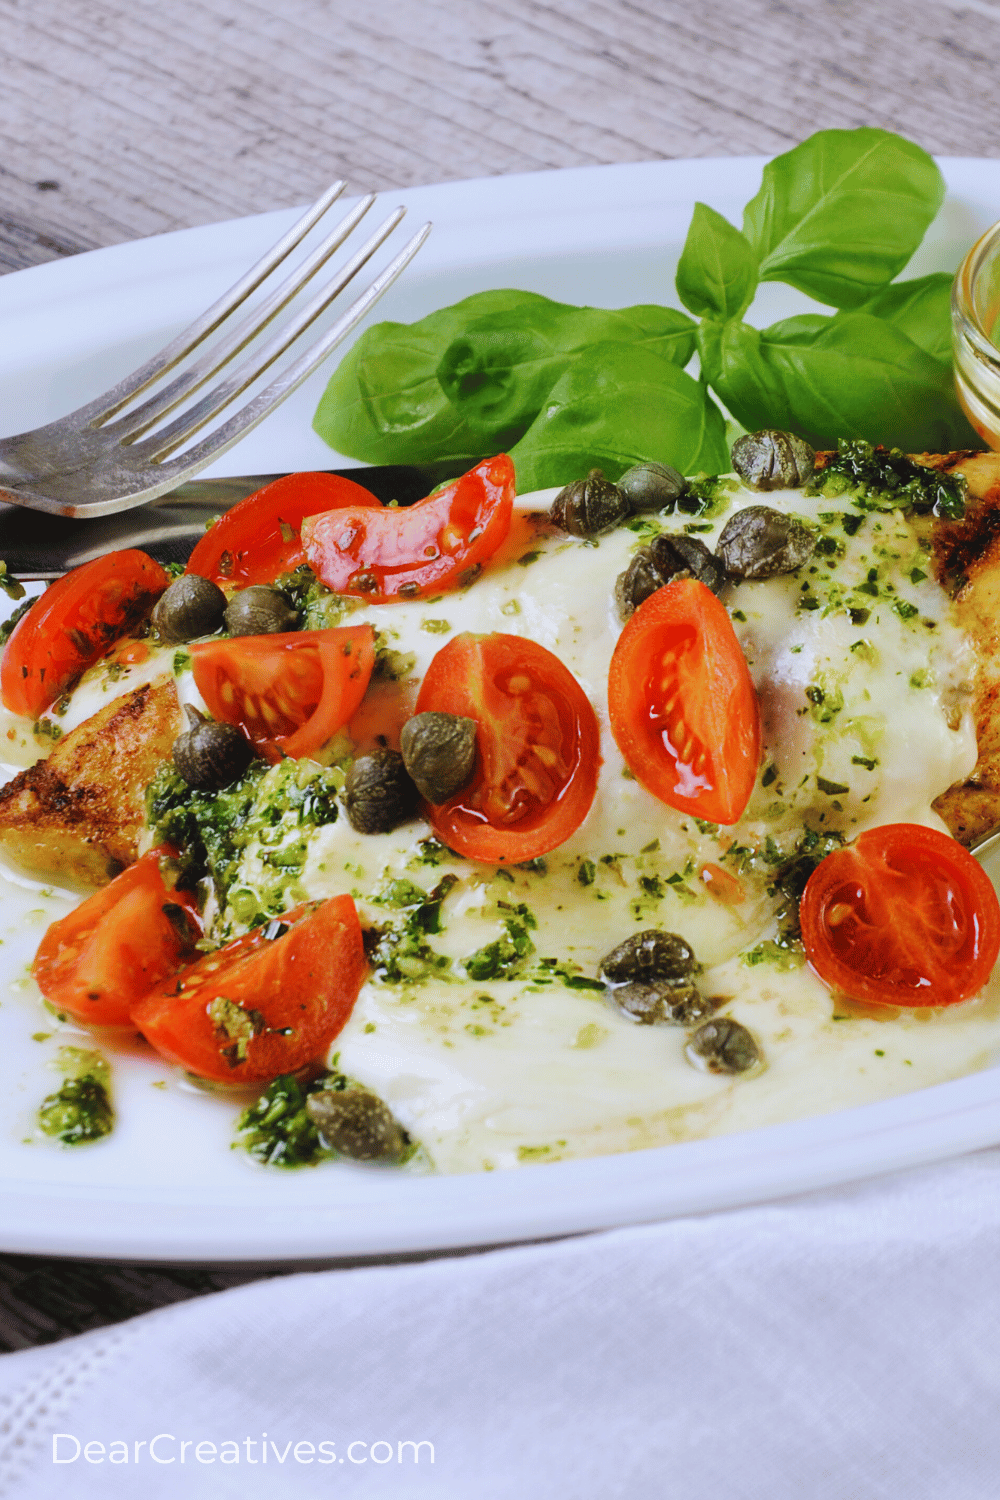 Chicken Mozzarella - Make this recipe with chicken thighs or chicken breasts. Easy, 30 minutes, and one pan! Tasty Mozzarella chicken DearCreatives.com (closeup of Caprese Chicken)